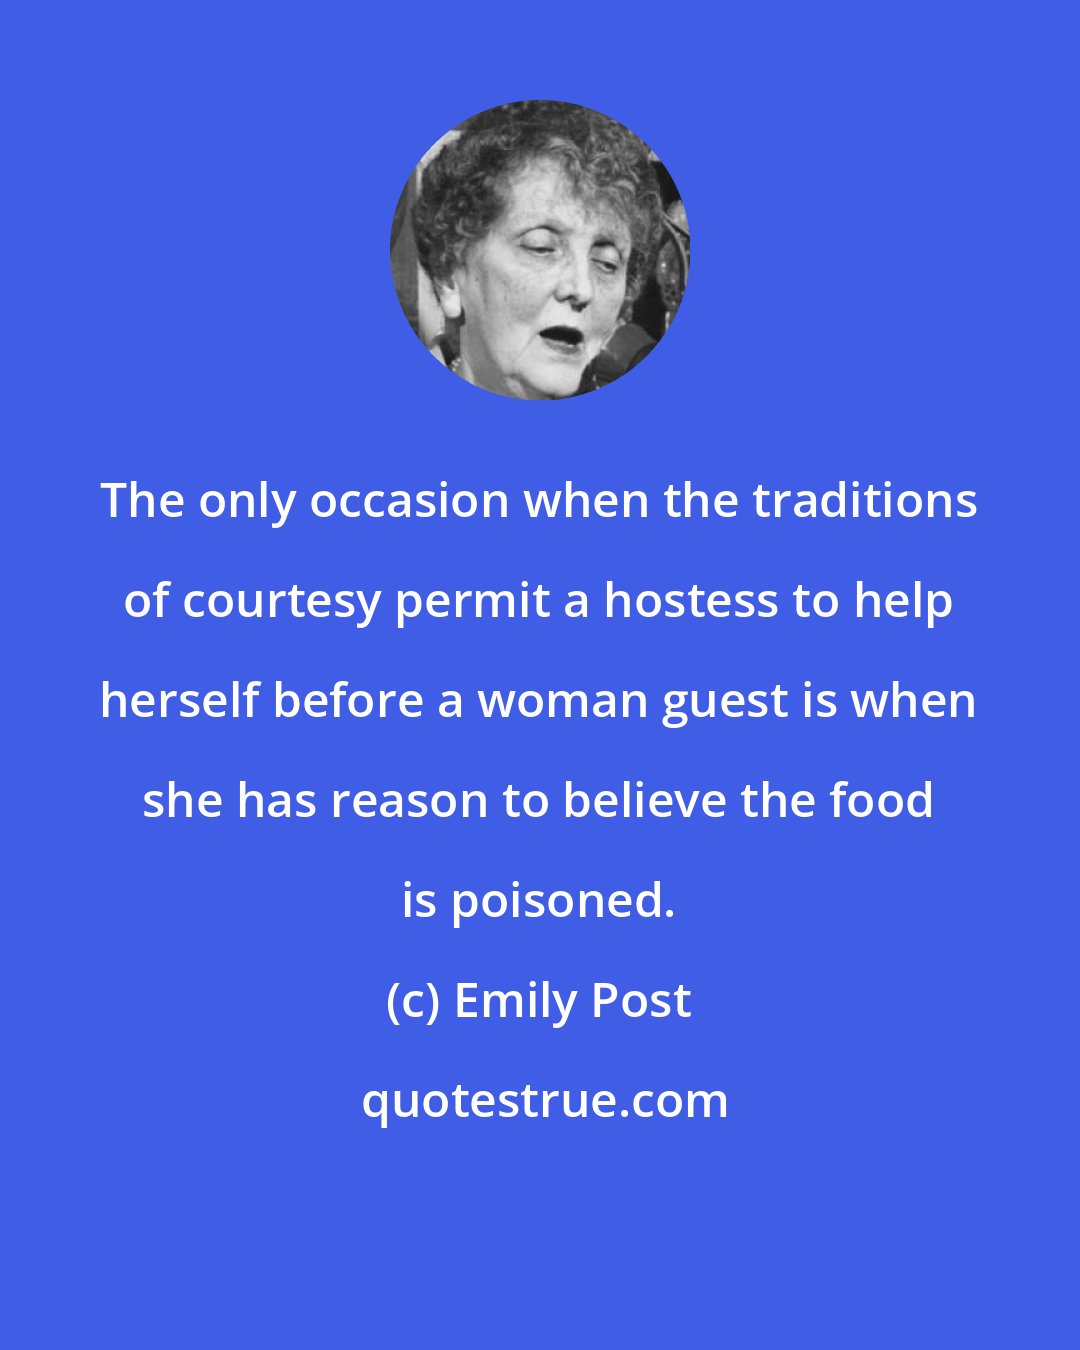 Emily Post: The only occasion when the traditions of courtesy permit a hostess to help herself before a woman guest is when she has reason to believe the food is poisoned.